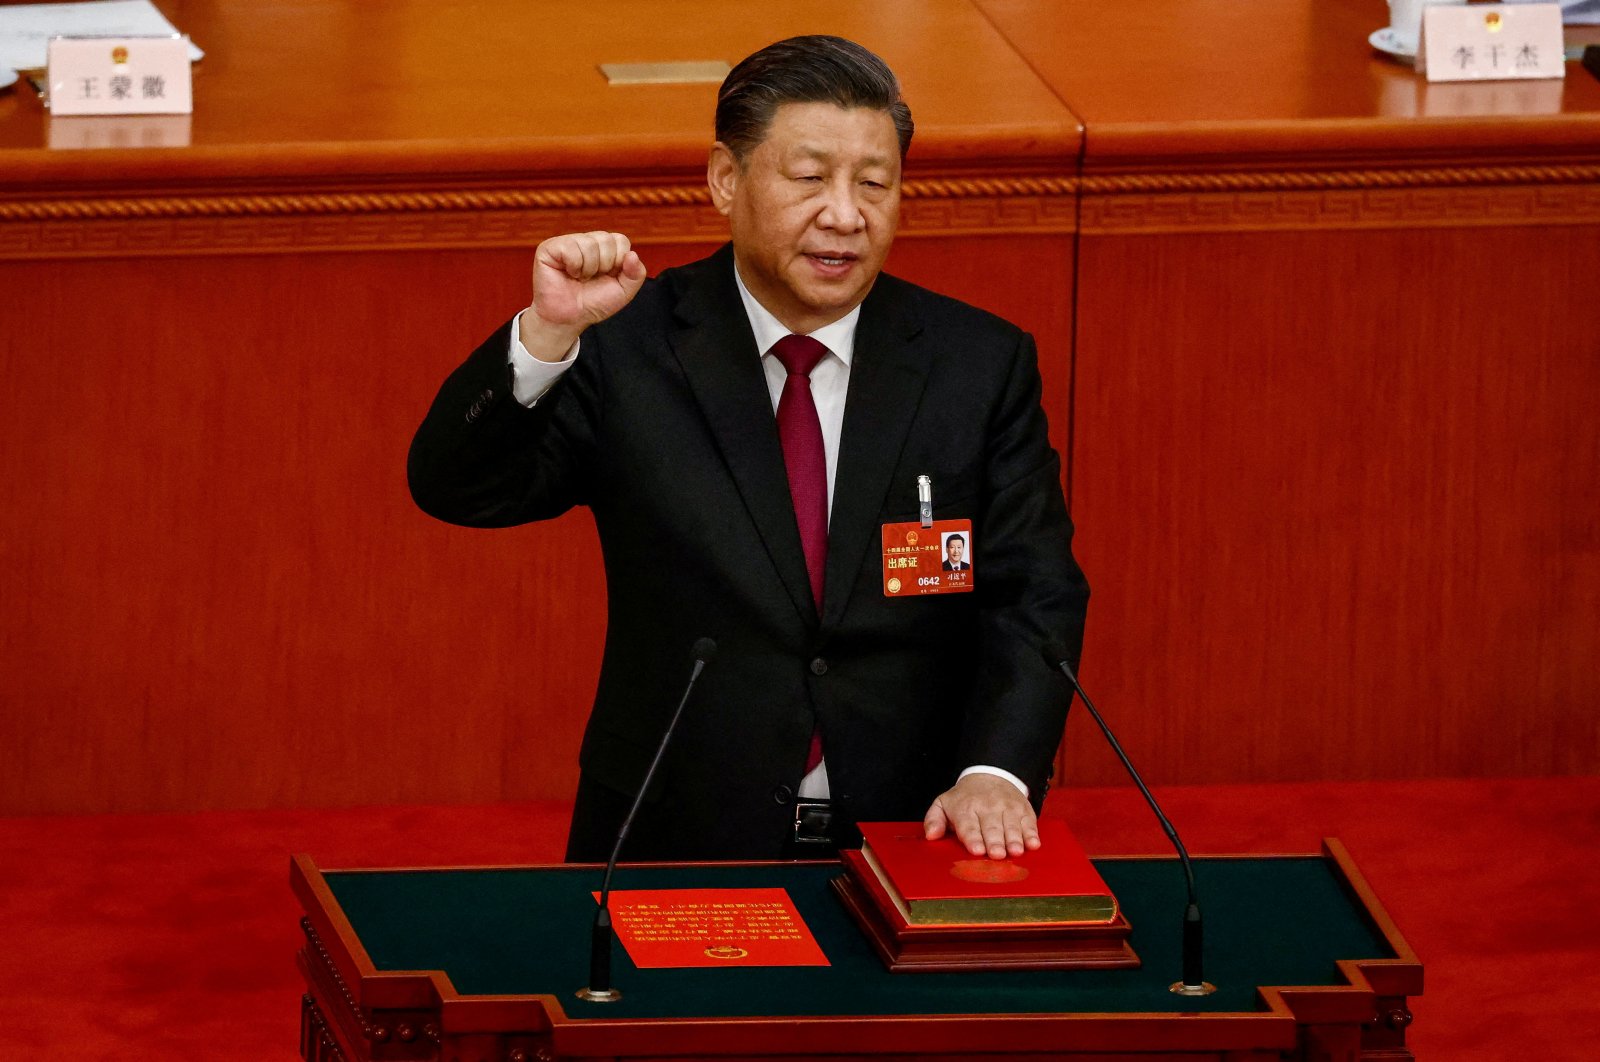 Chinese President Xi Jinping takes his oath during the 3rd Plenary Session of the National People&#039;s Congress (NPC), Beijing, China, March 10, 2023. (Reuters Photo)